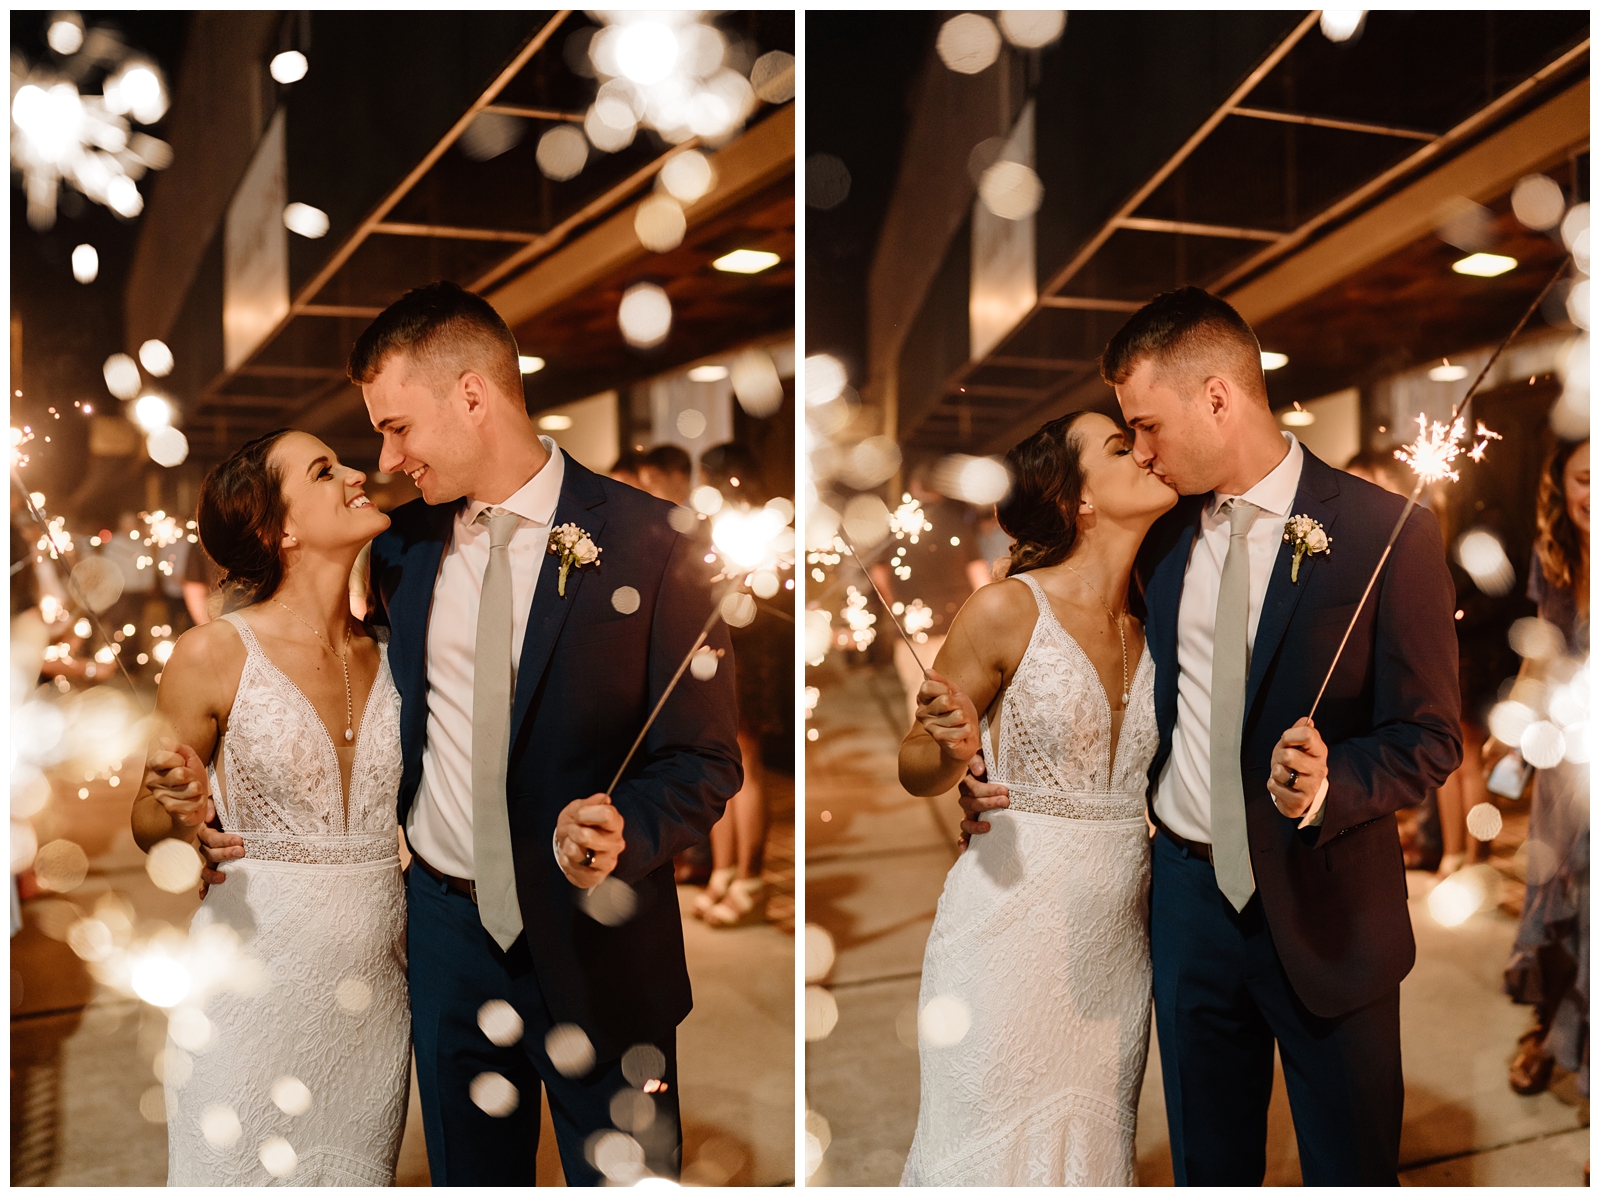 Romantic newlywed sparkler photos with the bride and groom at their modern indie wedding